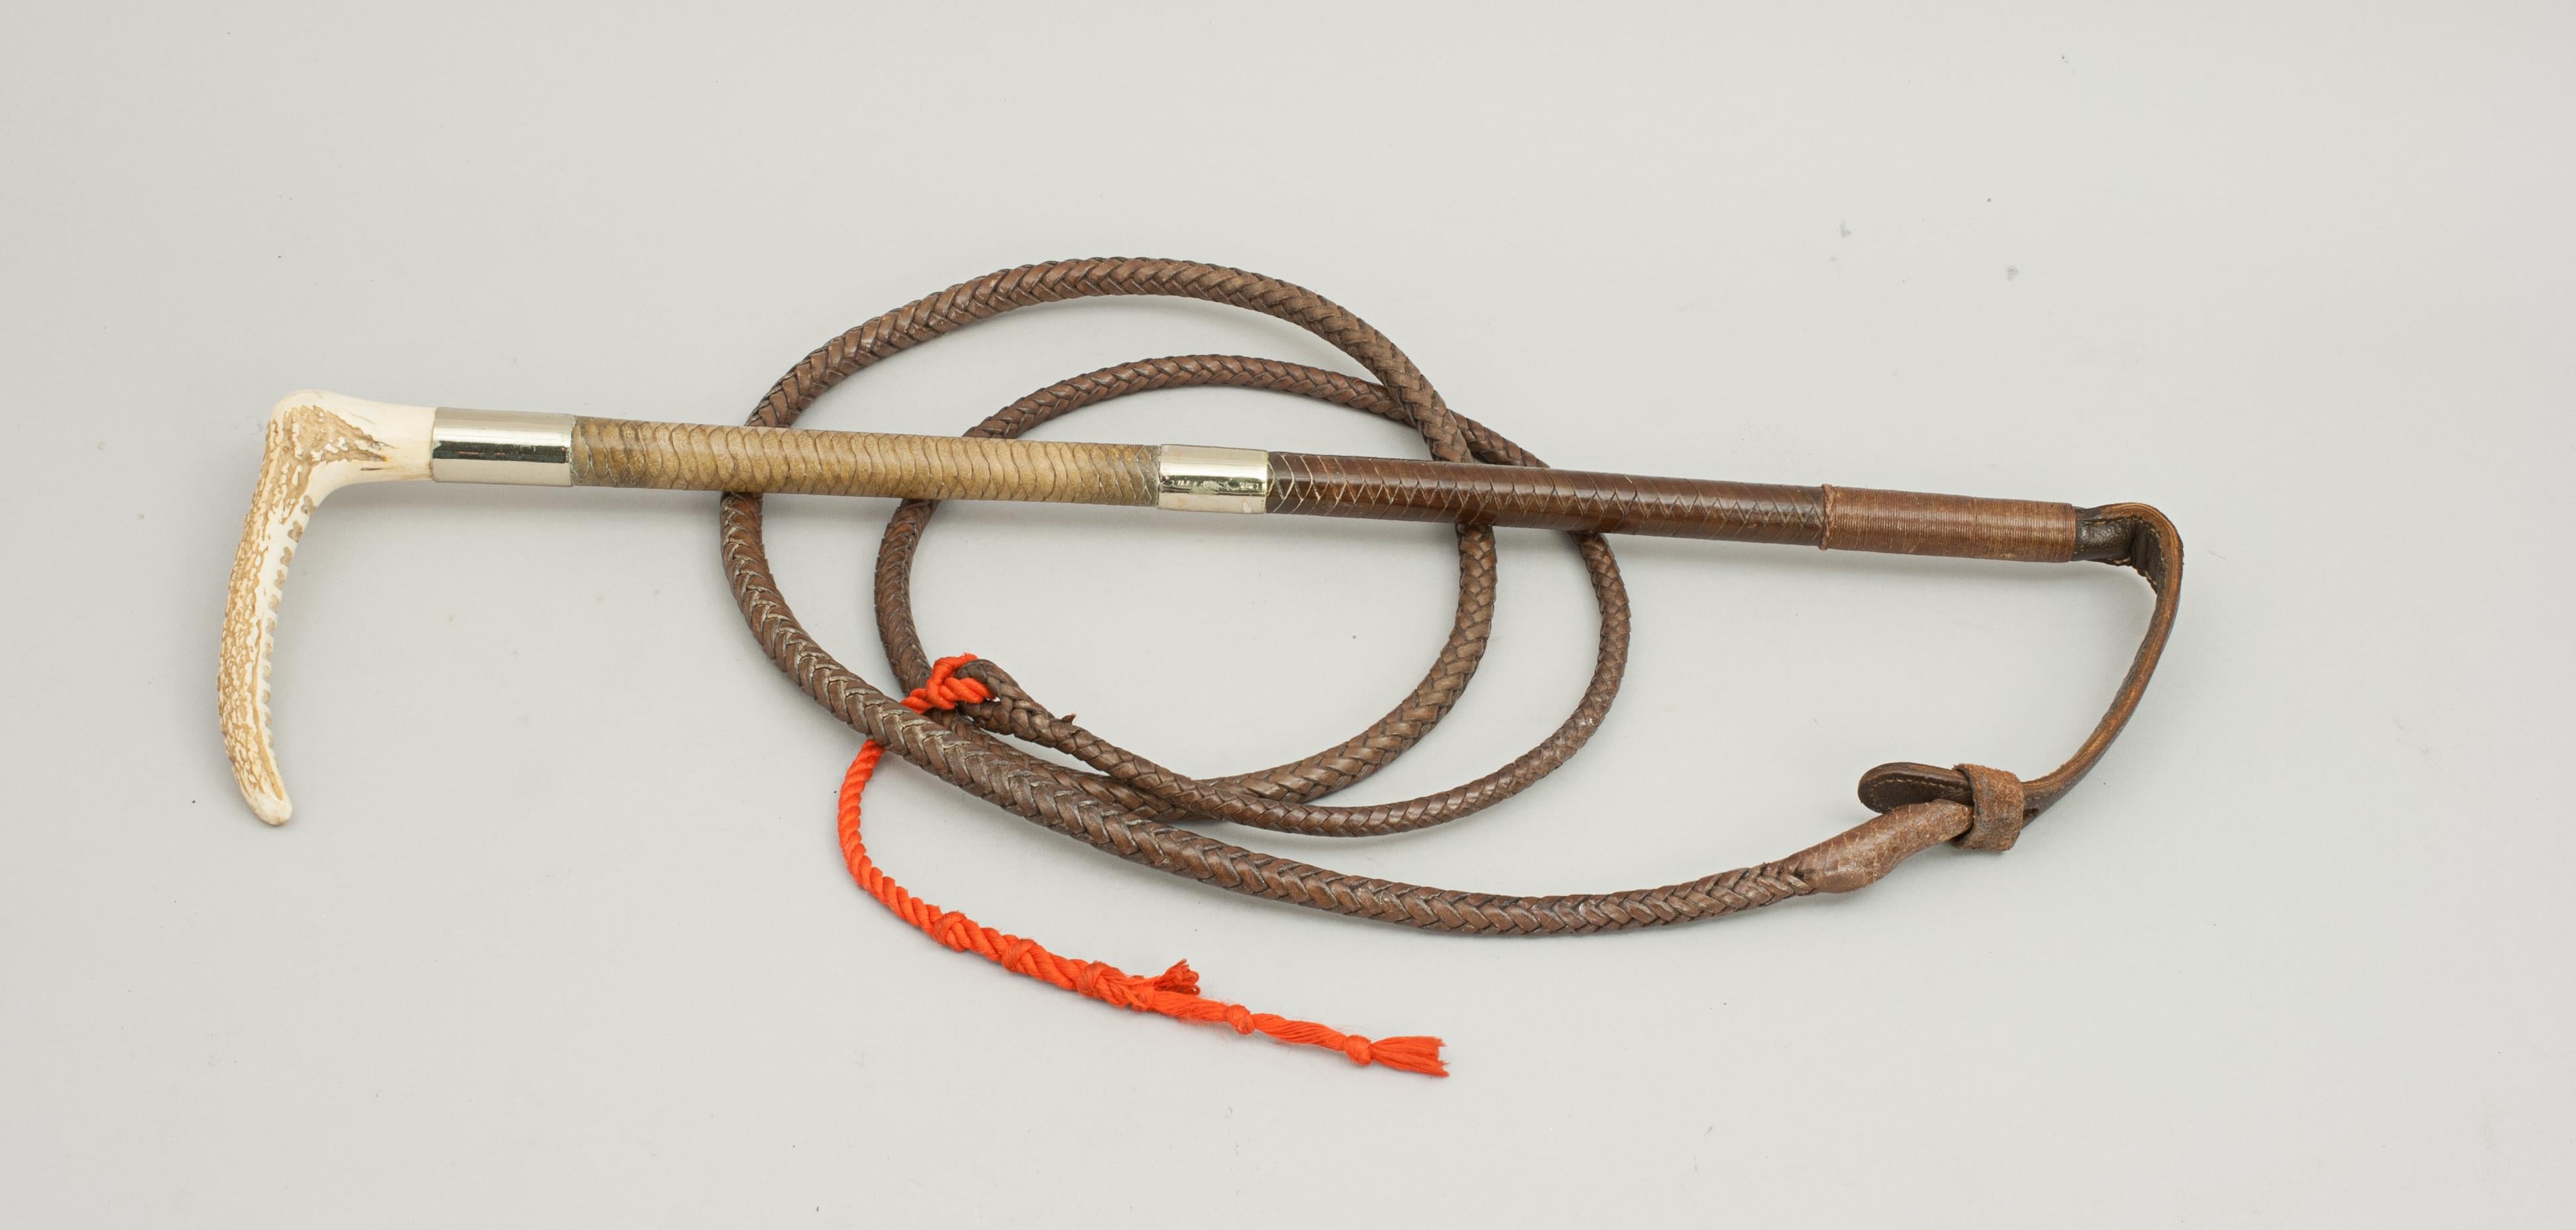 Vintage Hunting Whip, Riding Crop with Antler Handle 2